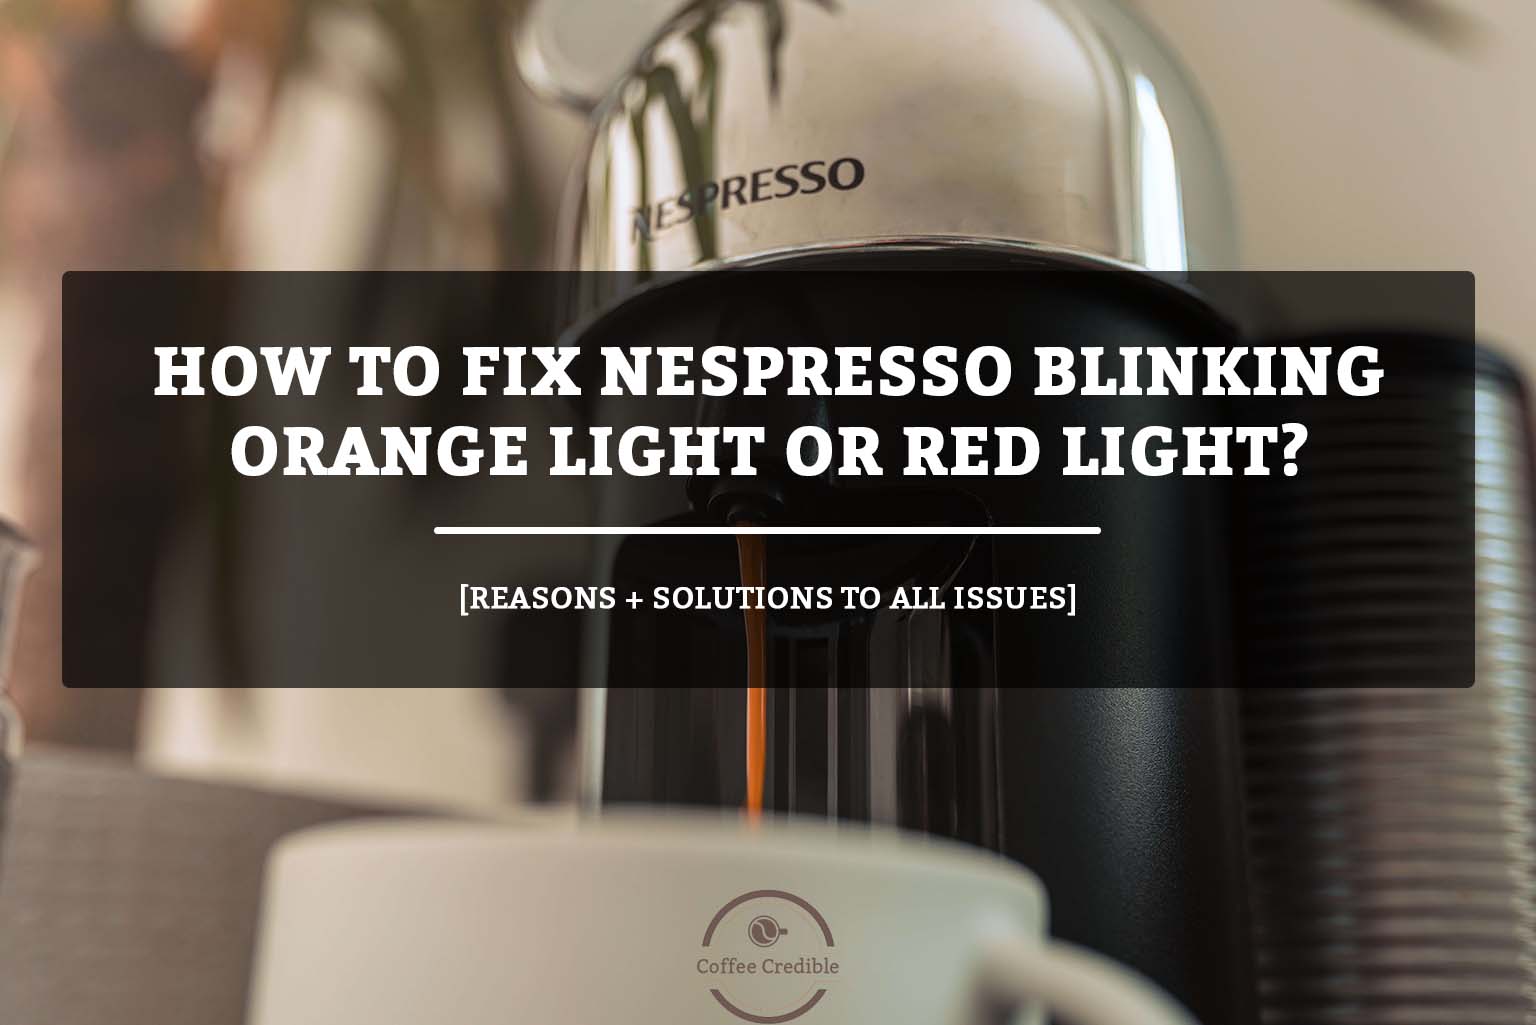 How To Fix Nespresso Blinking Orange Light Or Red Light? [Reasons + Solutions To All Issues]